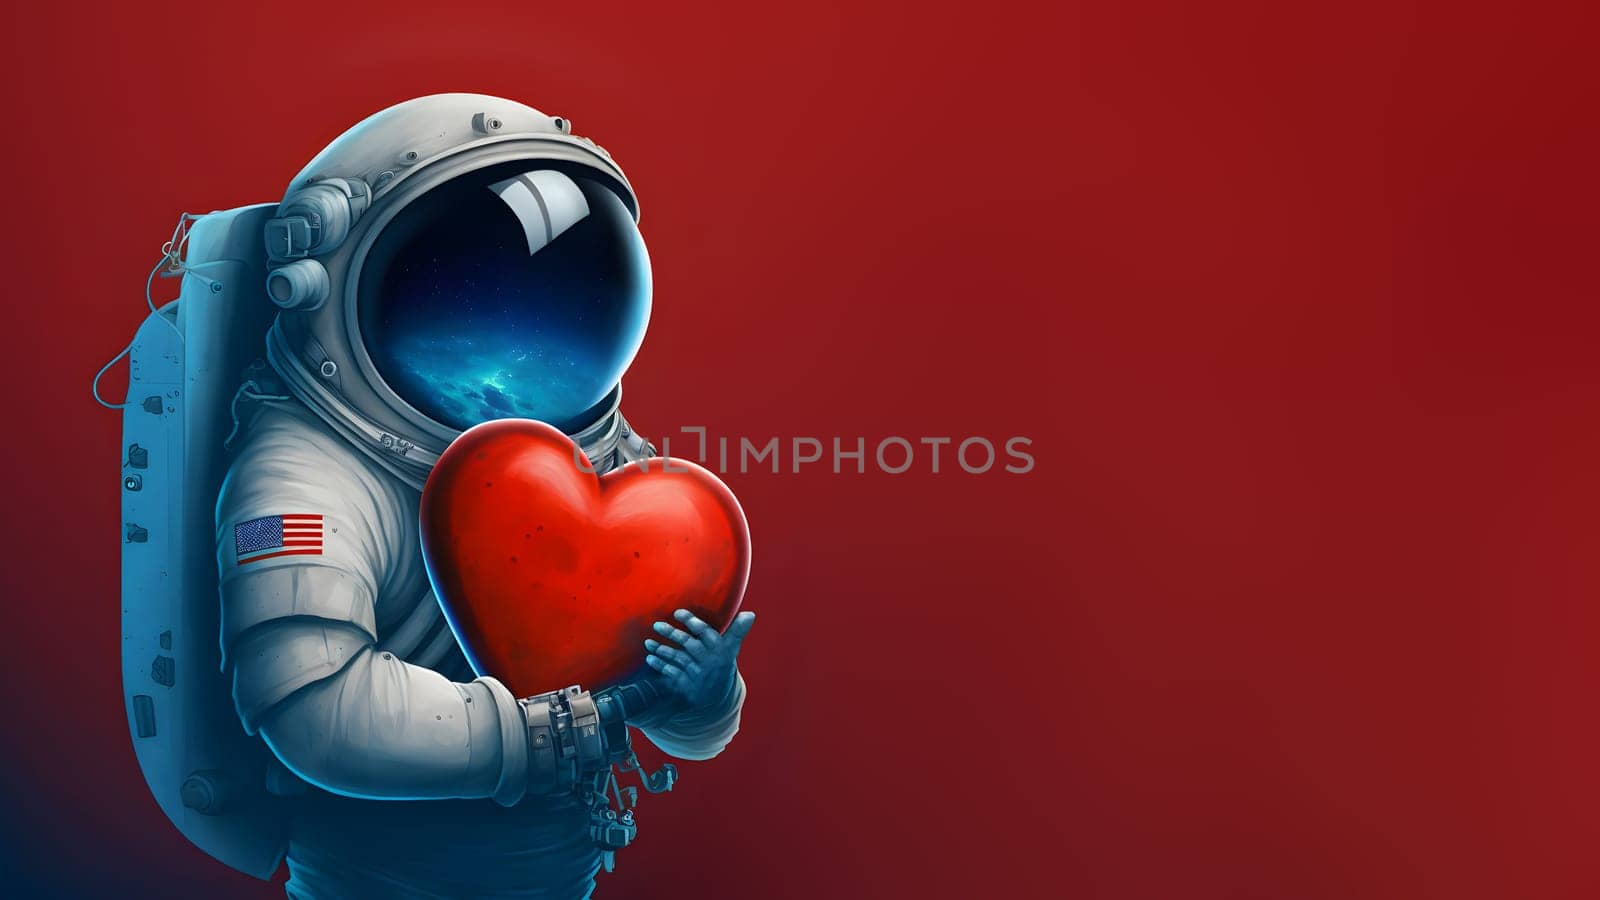 cosmonaut in space suit holding unknown red heart-shaped object, neural network generated art. Digitally generated image. Not based on any actual scene or pattern.